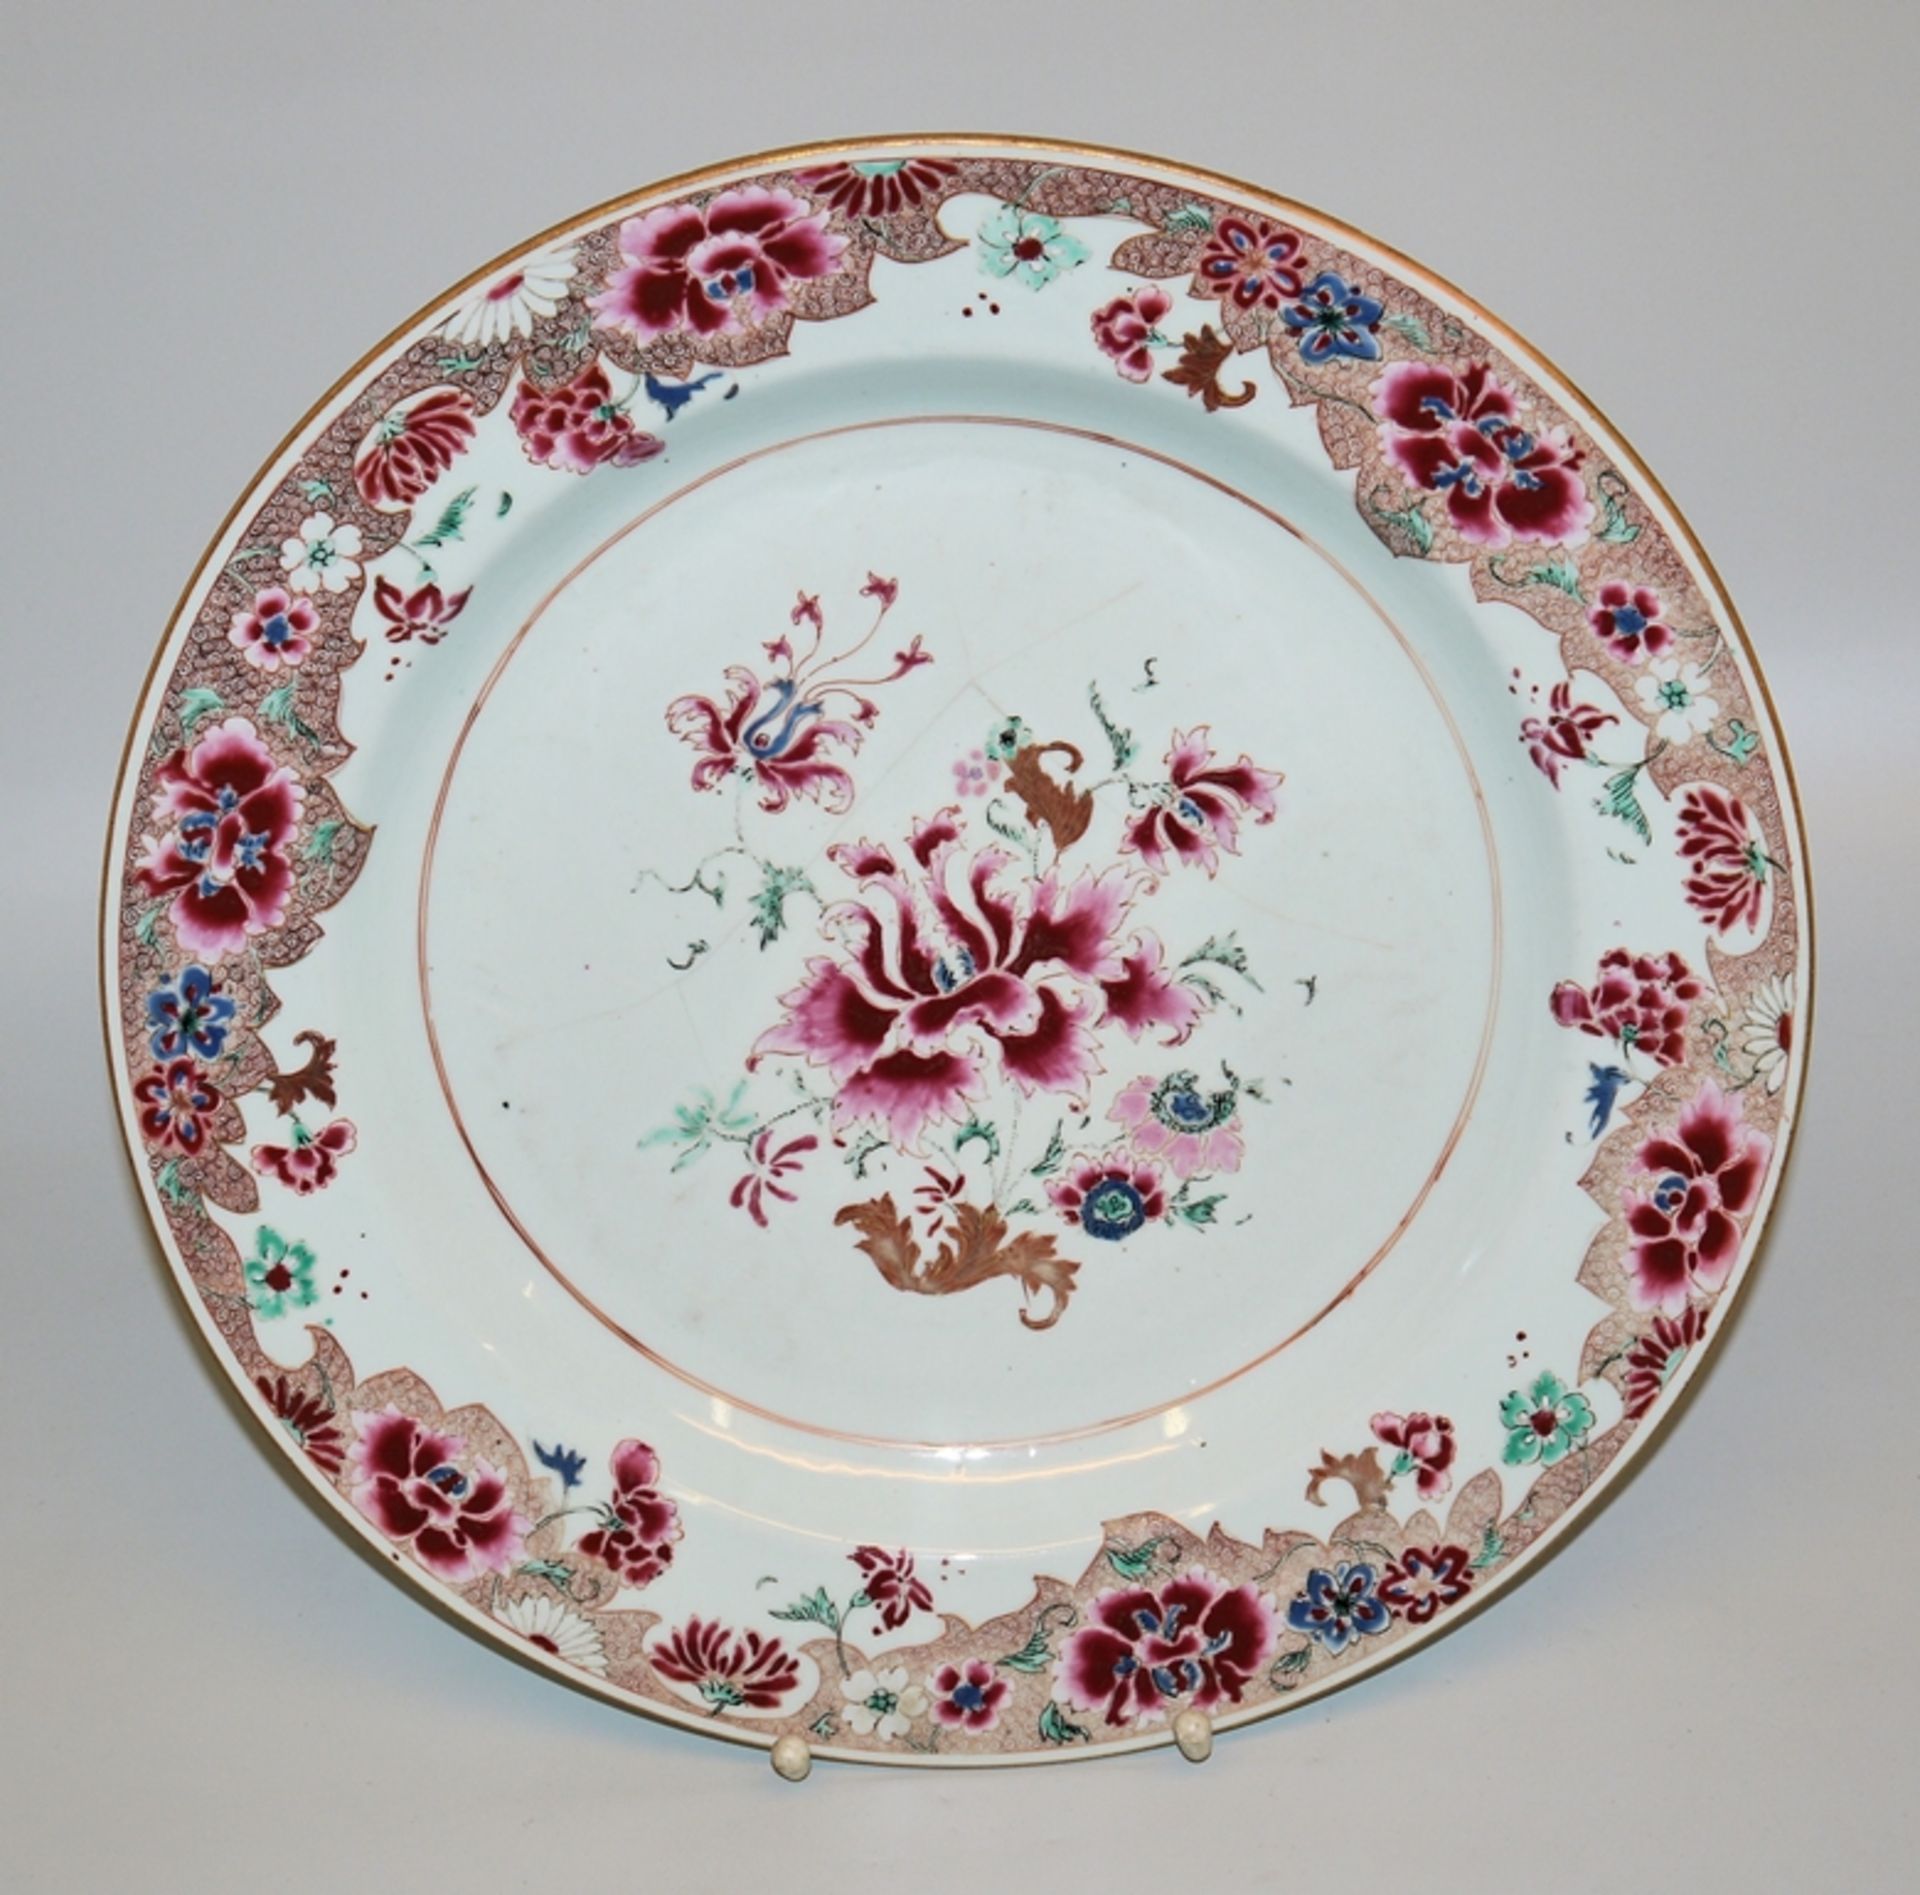 Large porcelain plate from the Yongzheng period, China circa 1730